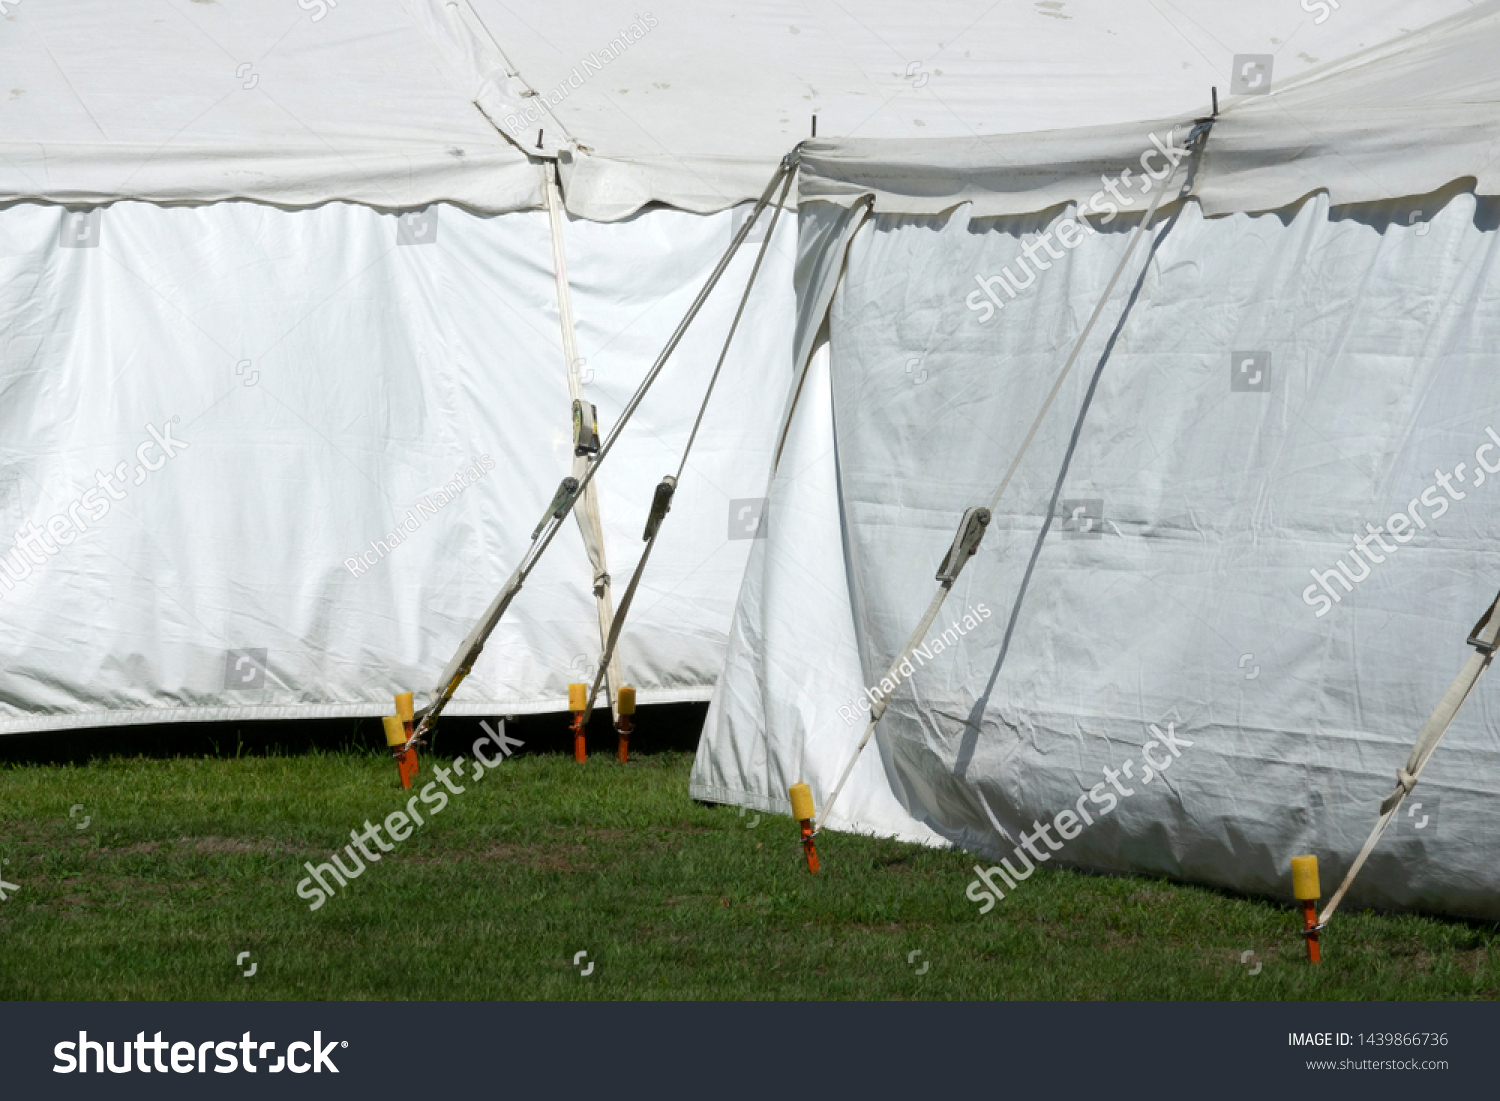 Binders for big circus tents #1439866736